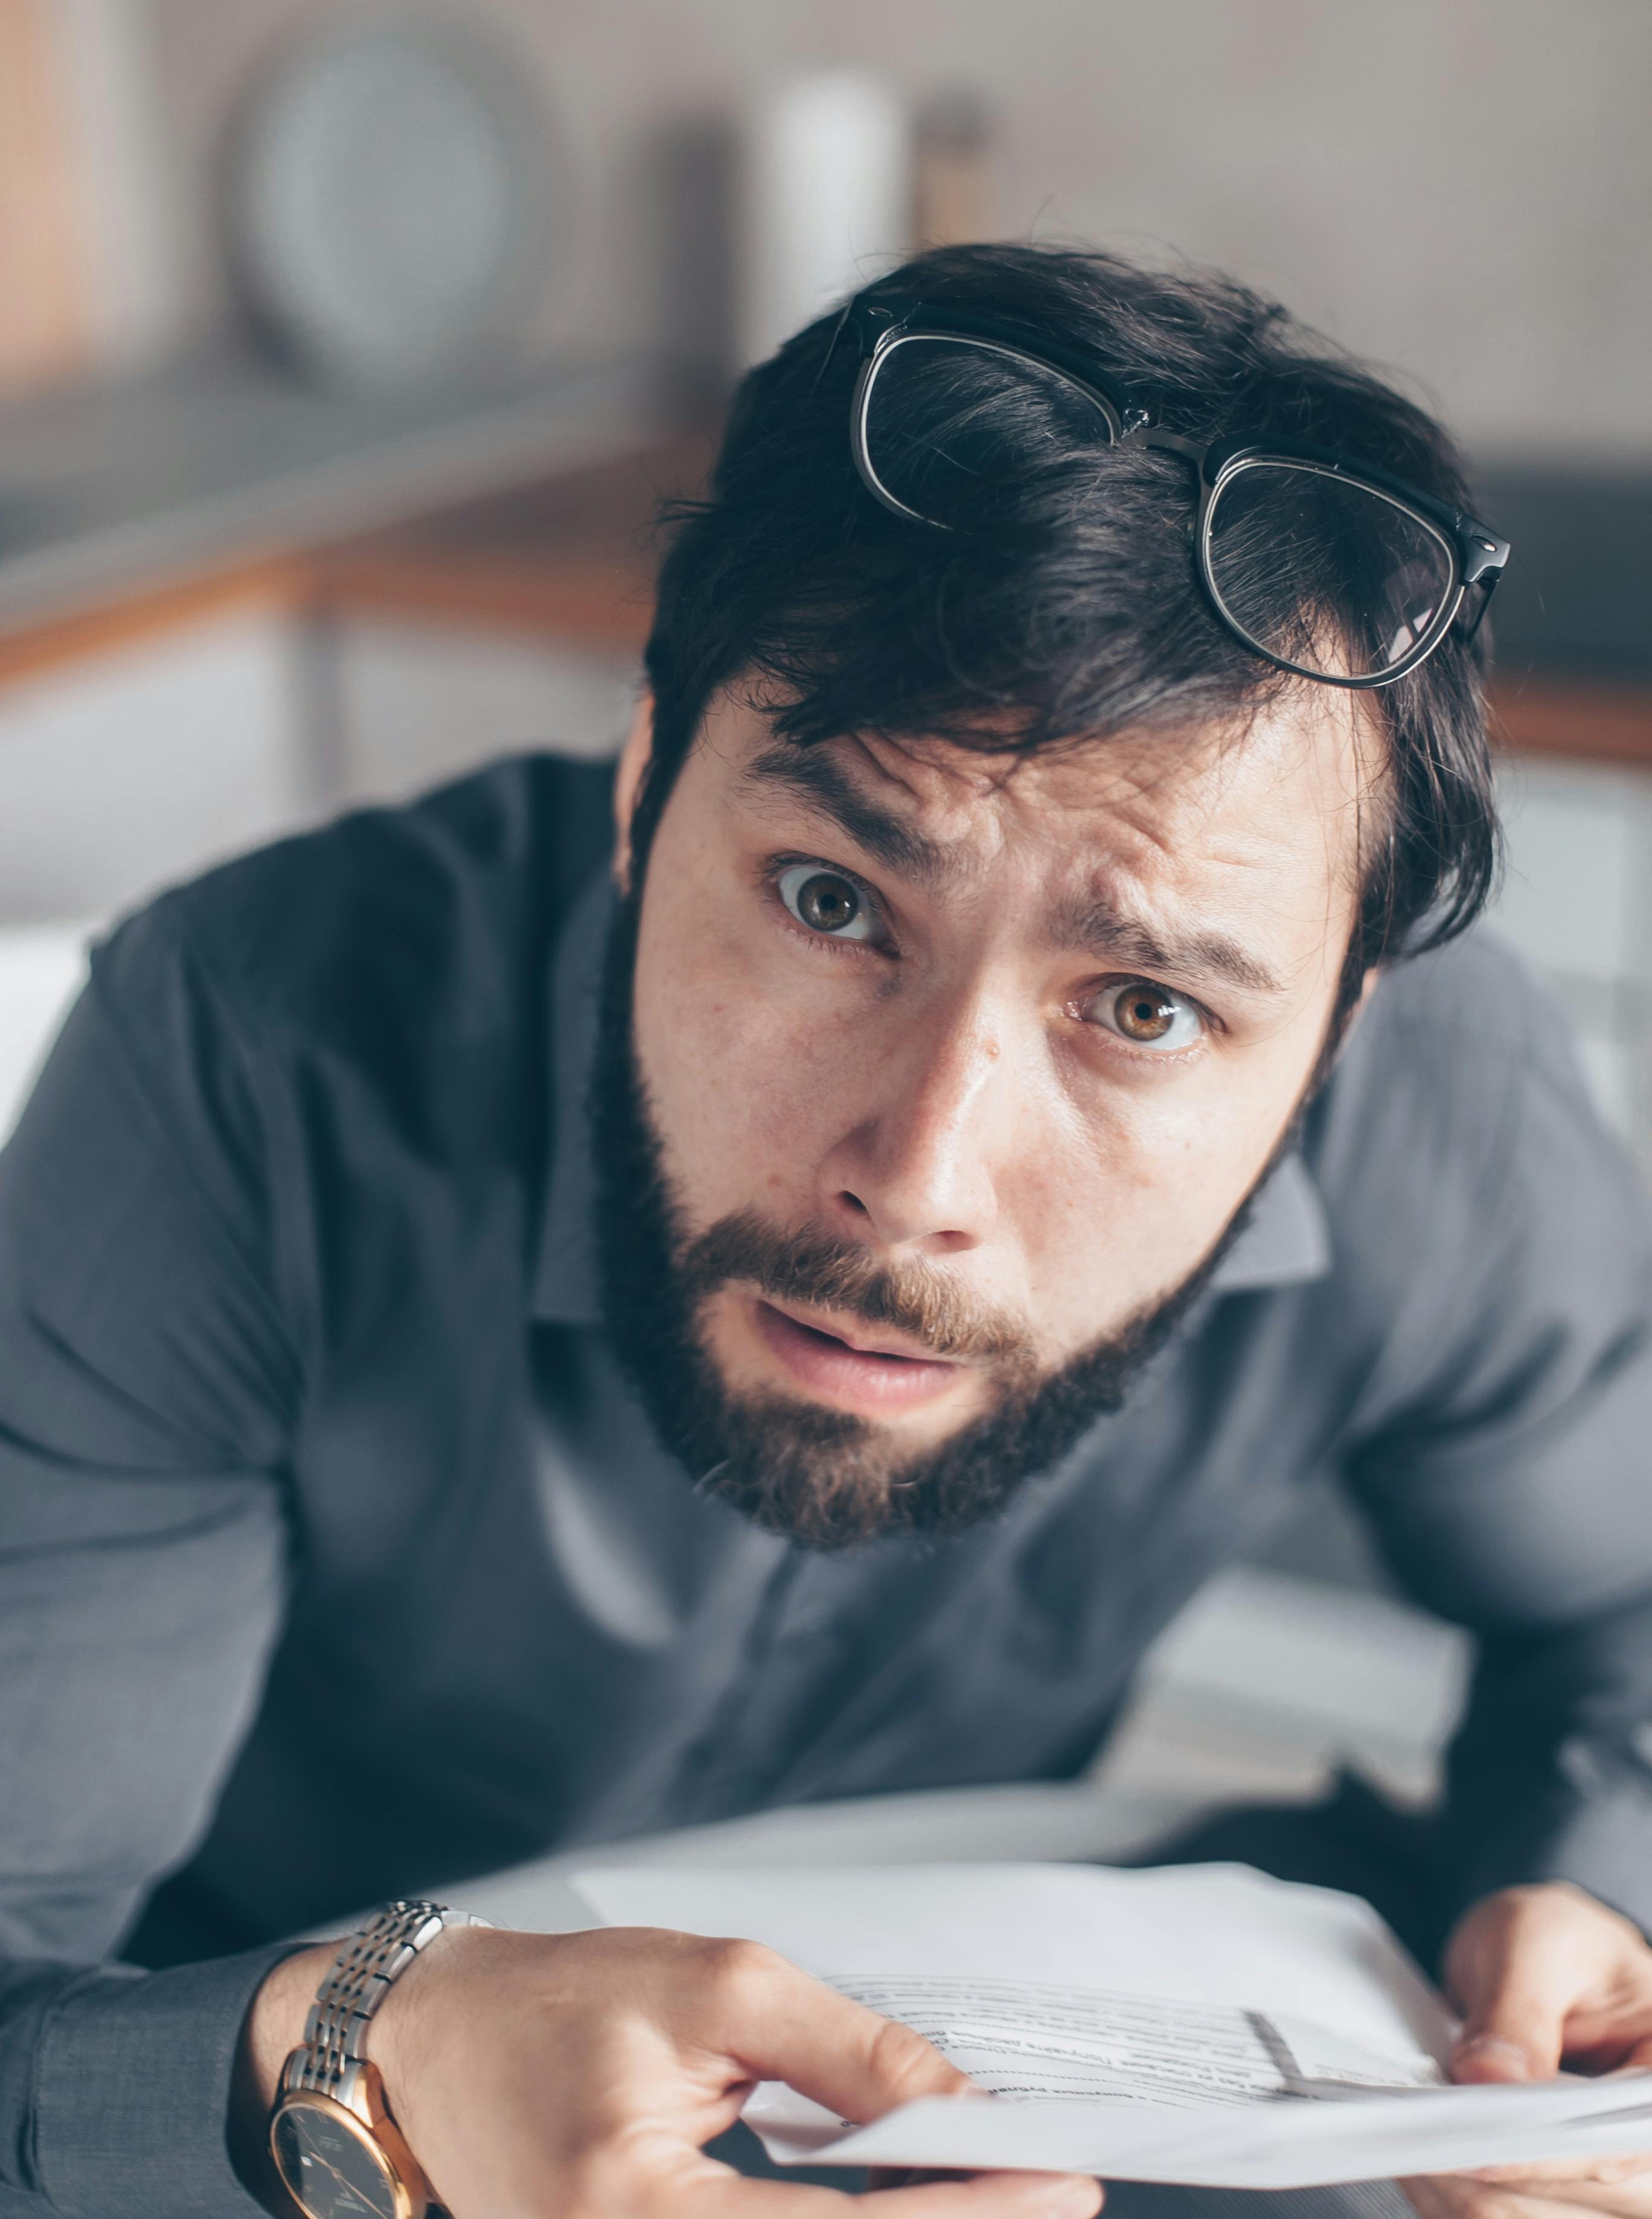 A shocked man reading a note | Source: Pexels